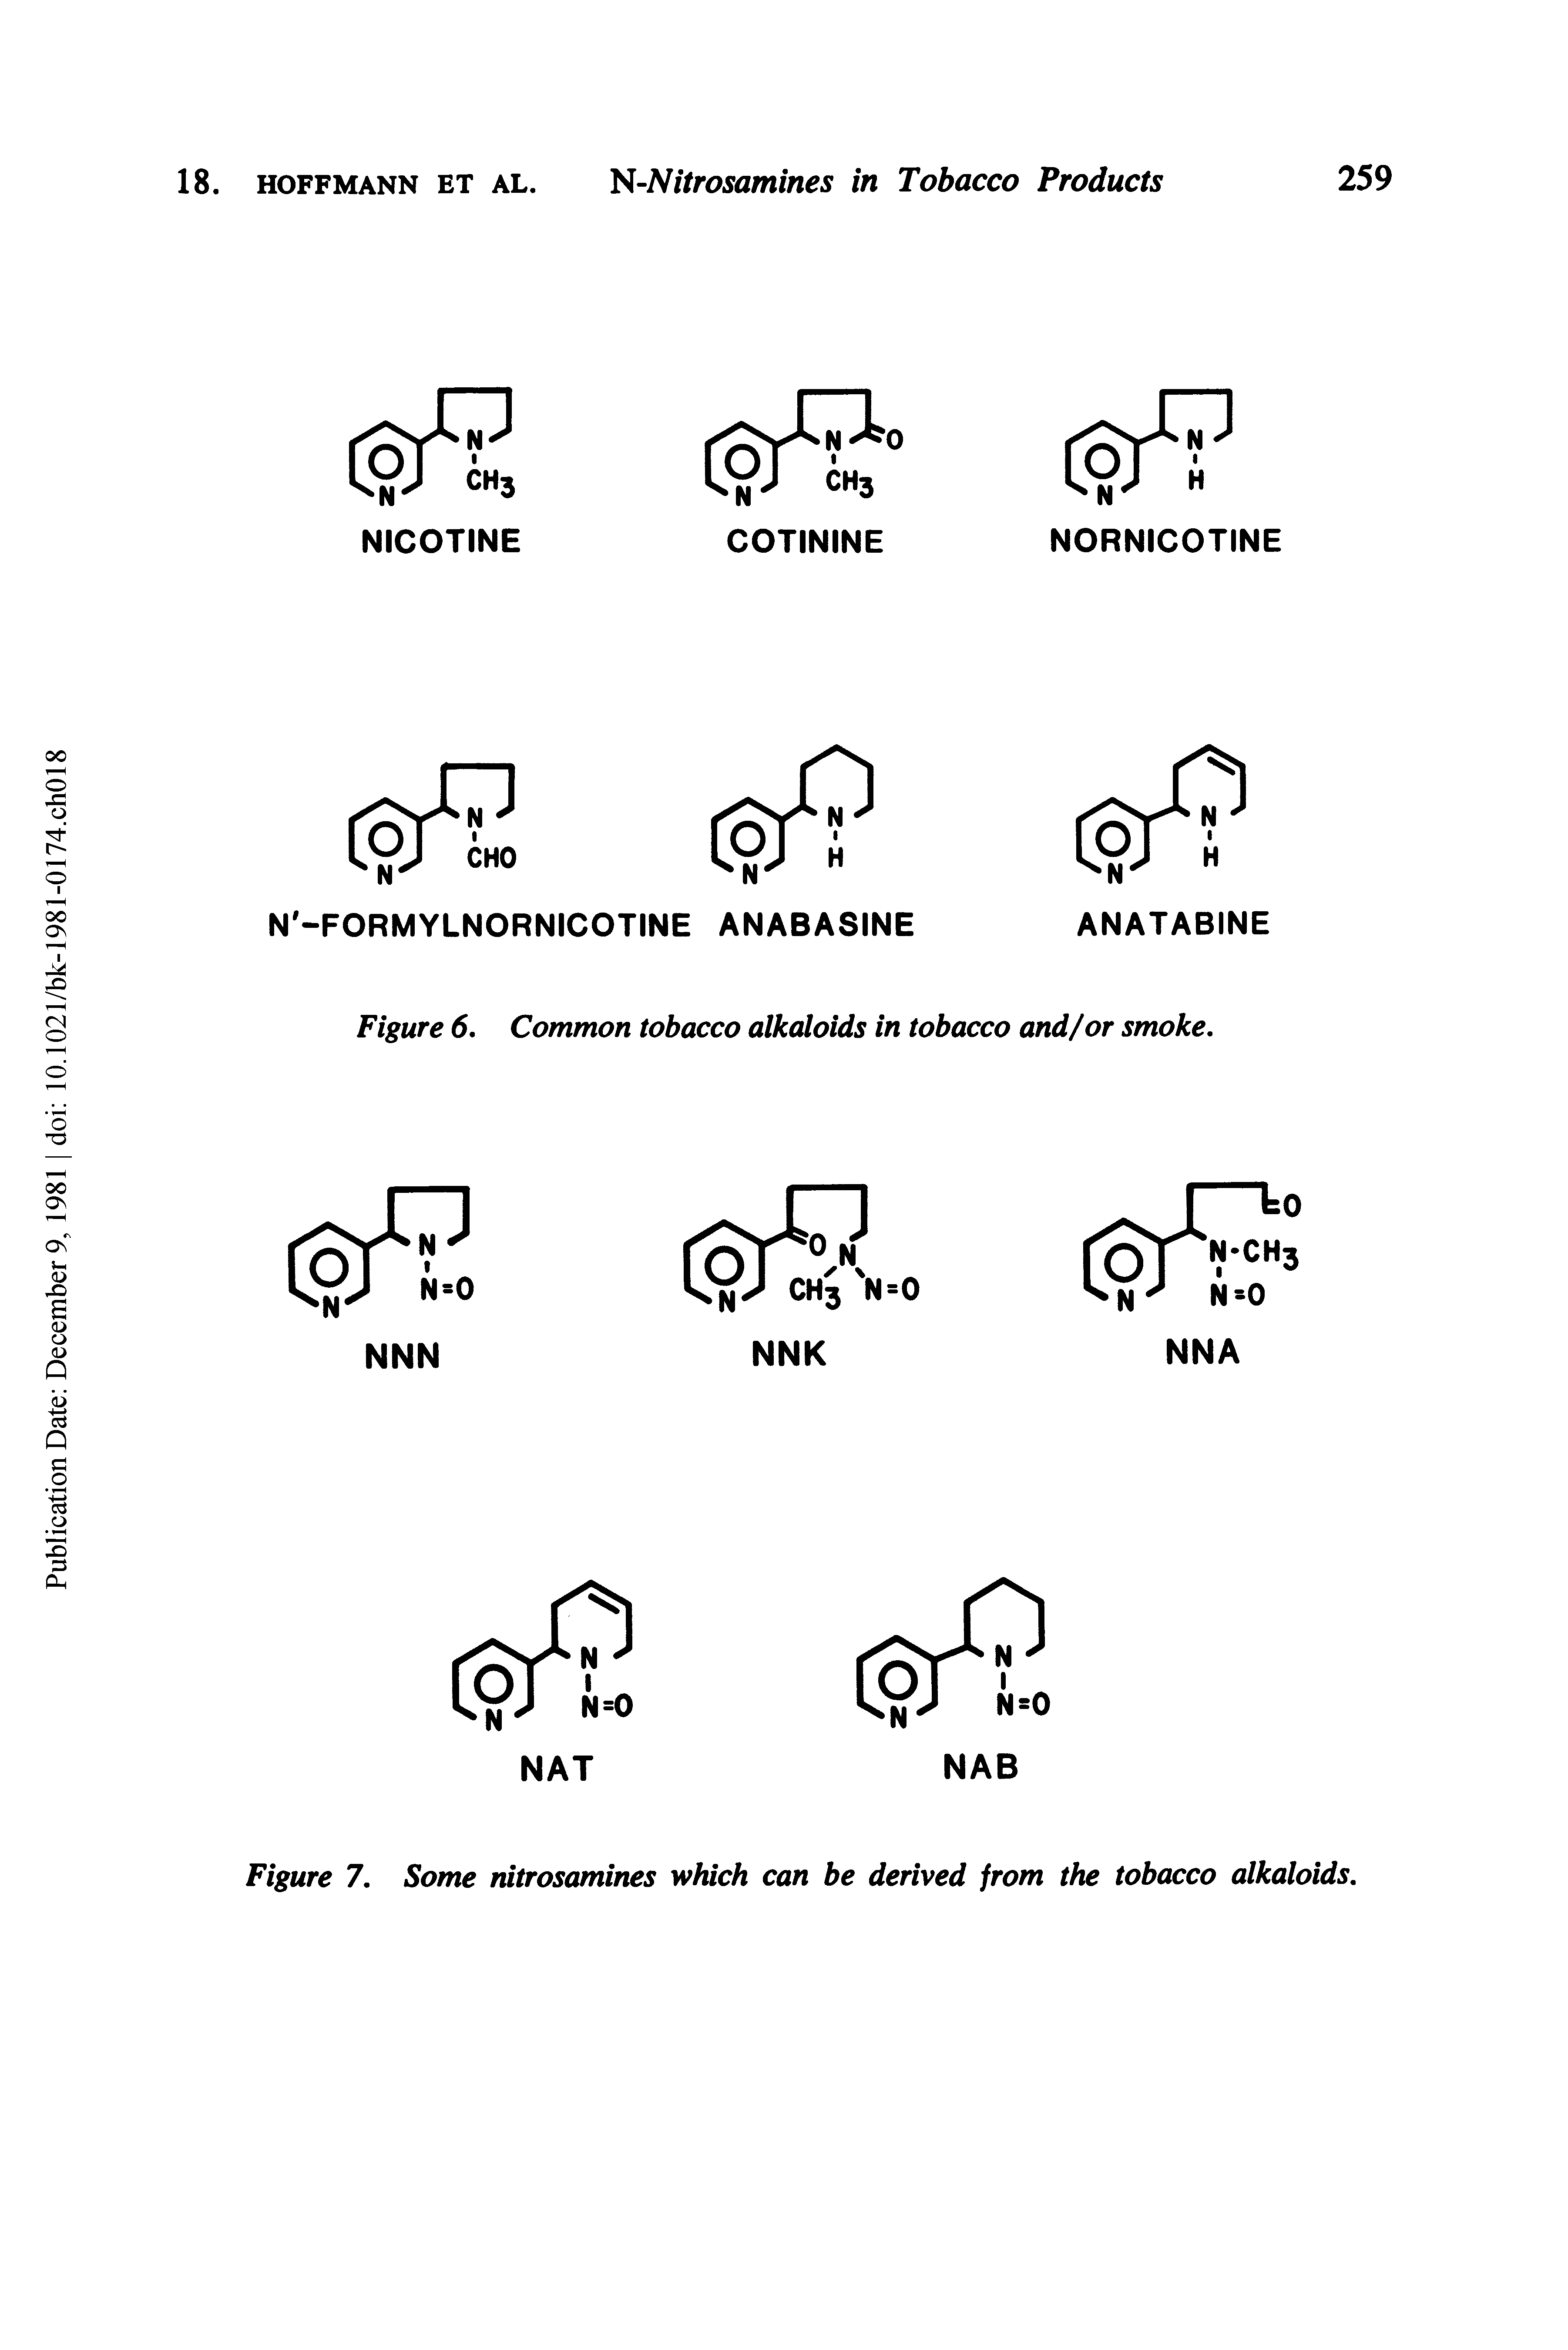 Figure 7. Some nitrosamines which can be derived from the tobacco alkaloids.